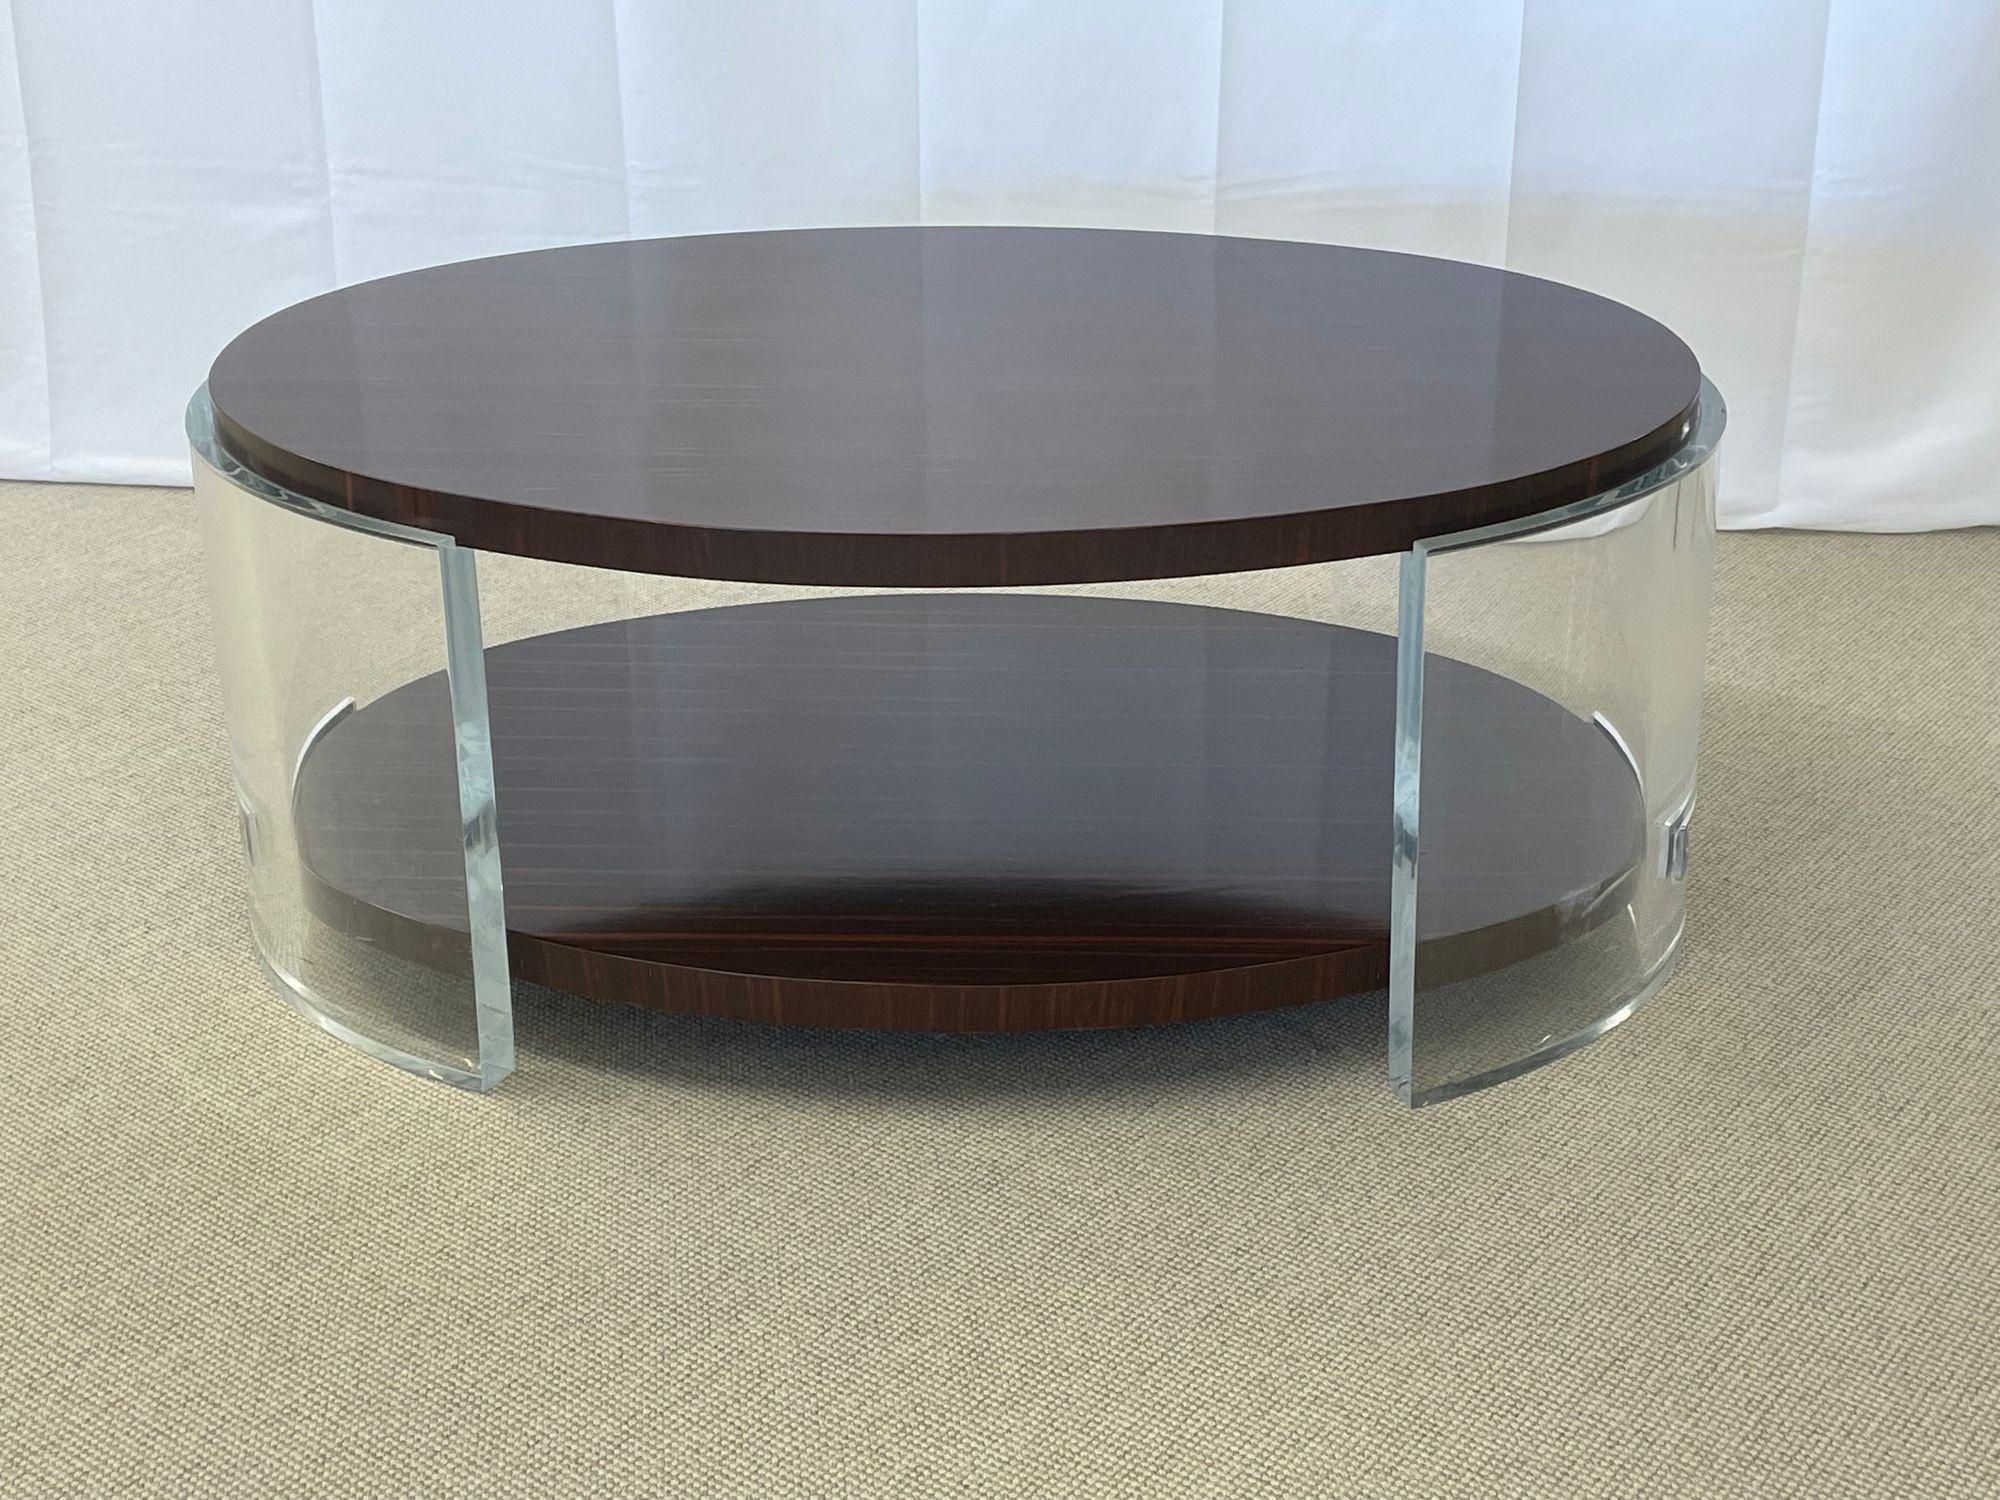 Macassar Ebony Oval Lucite Acrylic Coffee Cocktail Table, Jonathan Franc
 
An impressive cocktail table by Jonathan Franc featuring an elliptical top and lower shelf of highly polished, natural Macassar ebony that are supported by substantive,